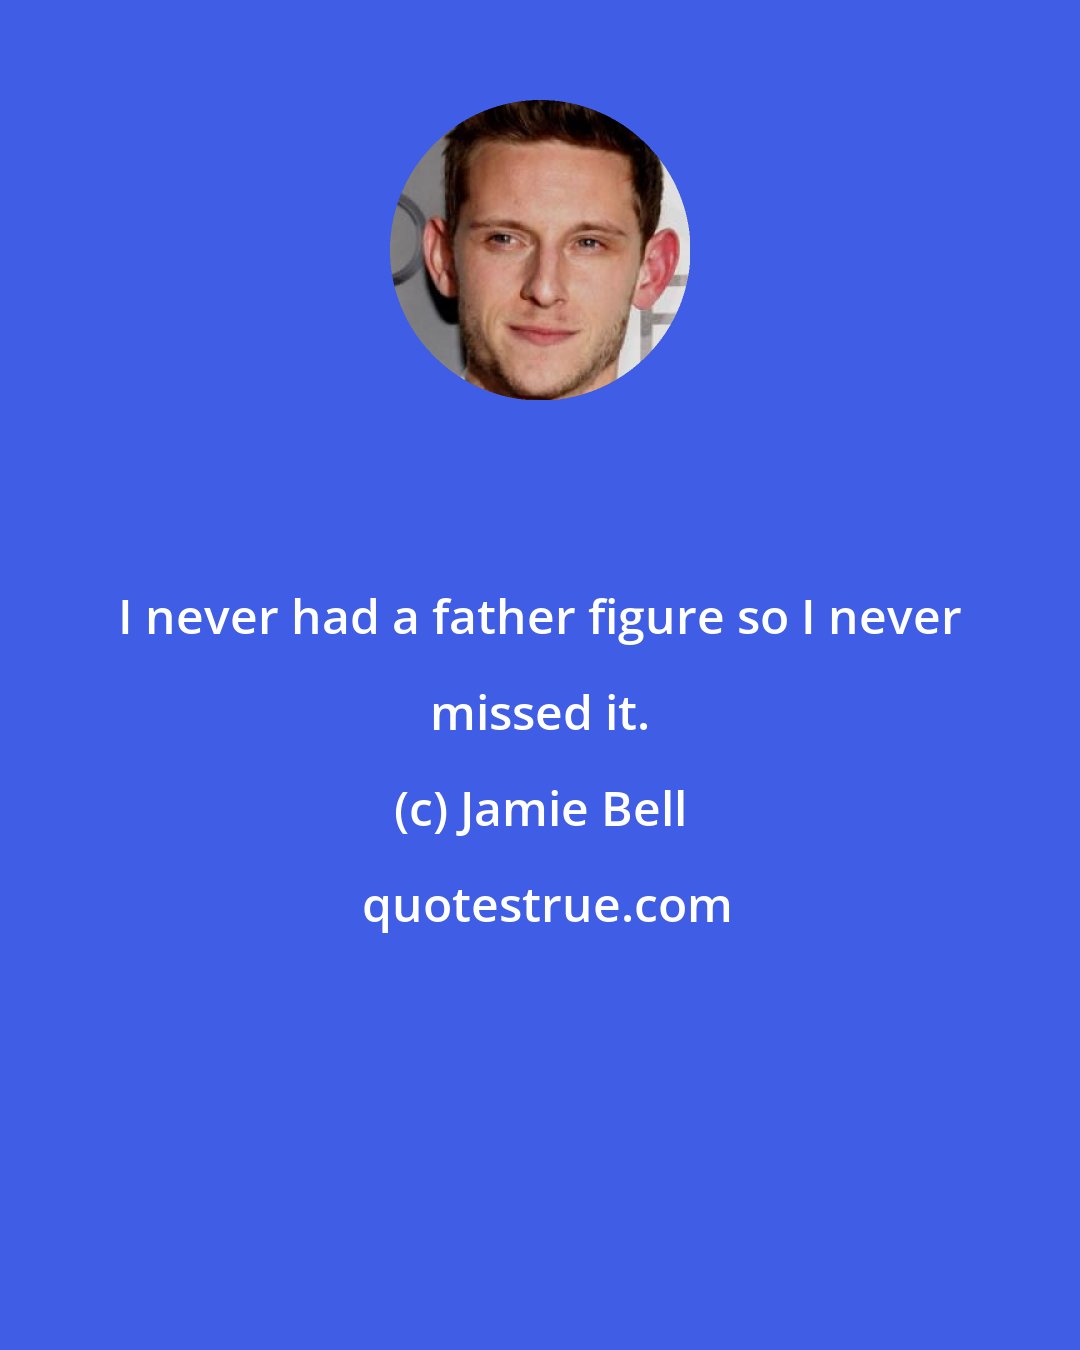 Jamie Bell: I never had a father figure so I never missed it.